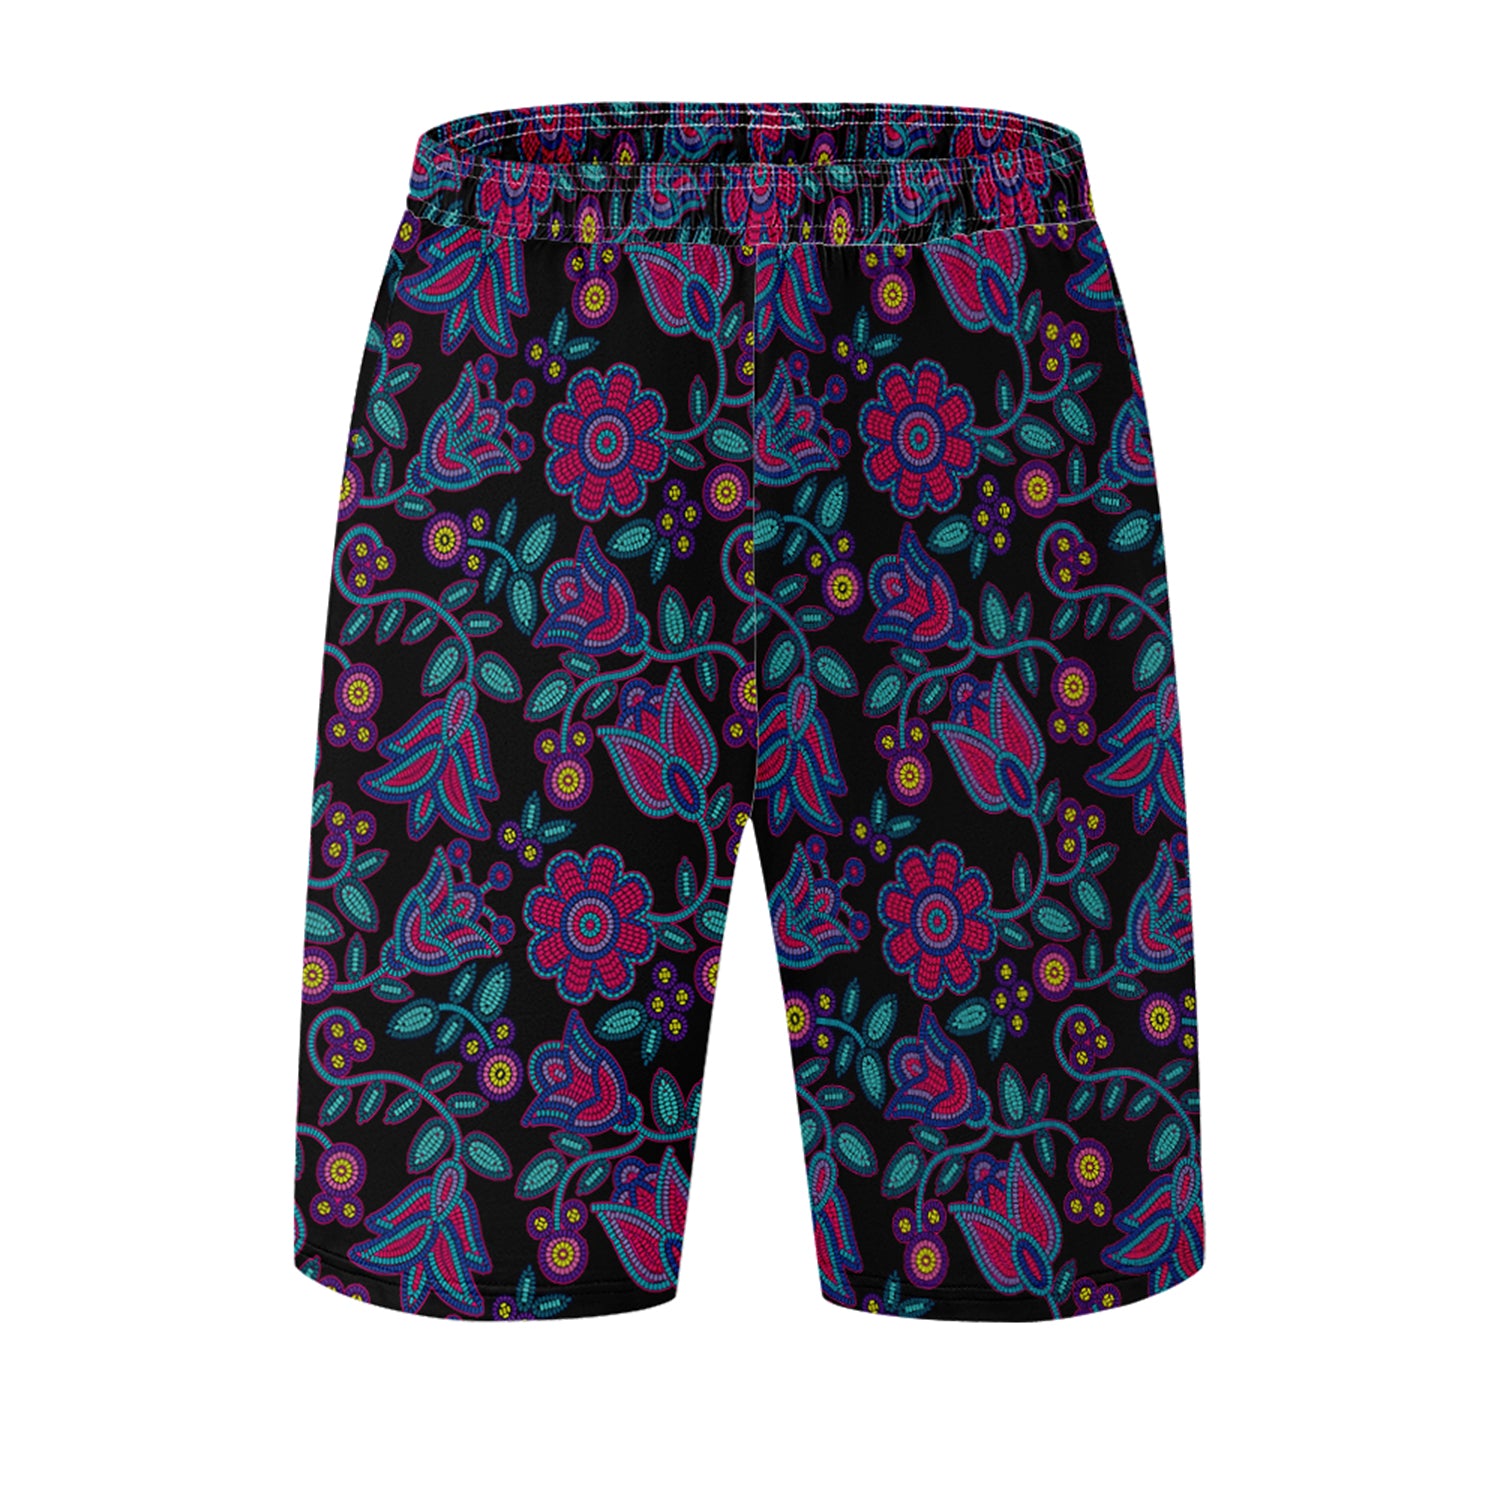 Beaded Nouveau Coal Athletic Shorts with Pockets